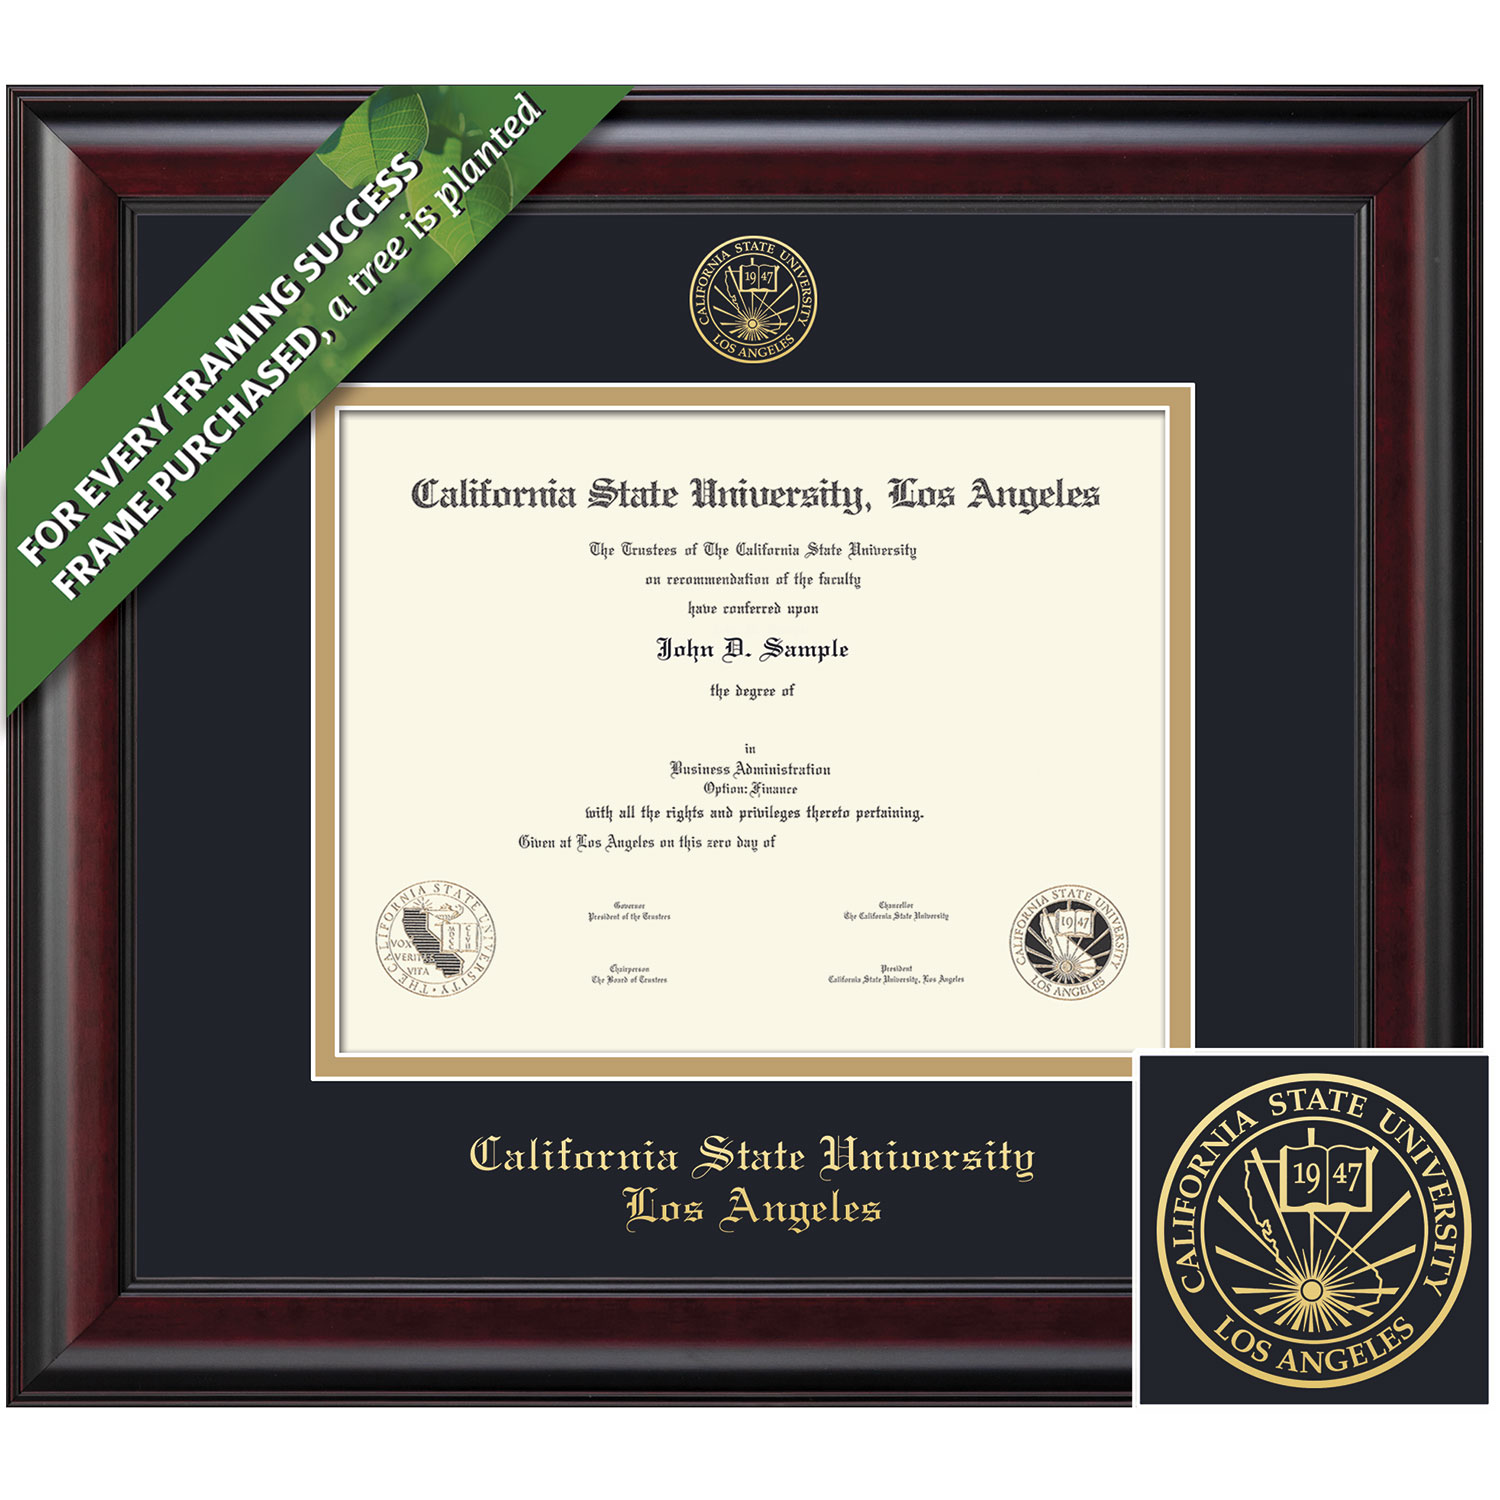 Framing Success 8.5 x 11 Classic Gold Embossed School Seal Bachelors, Masters, PhD Diploma Frame